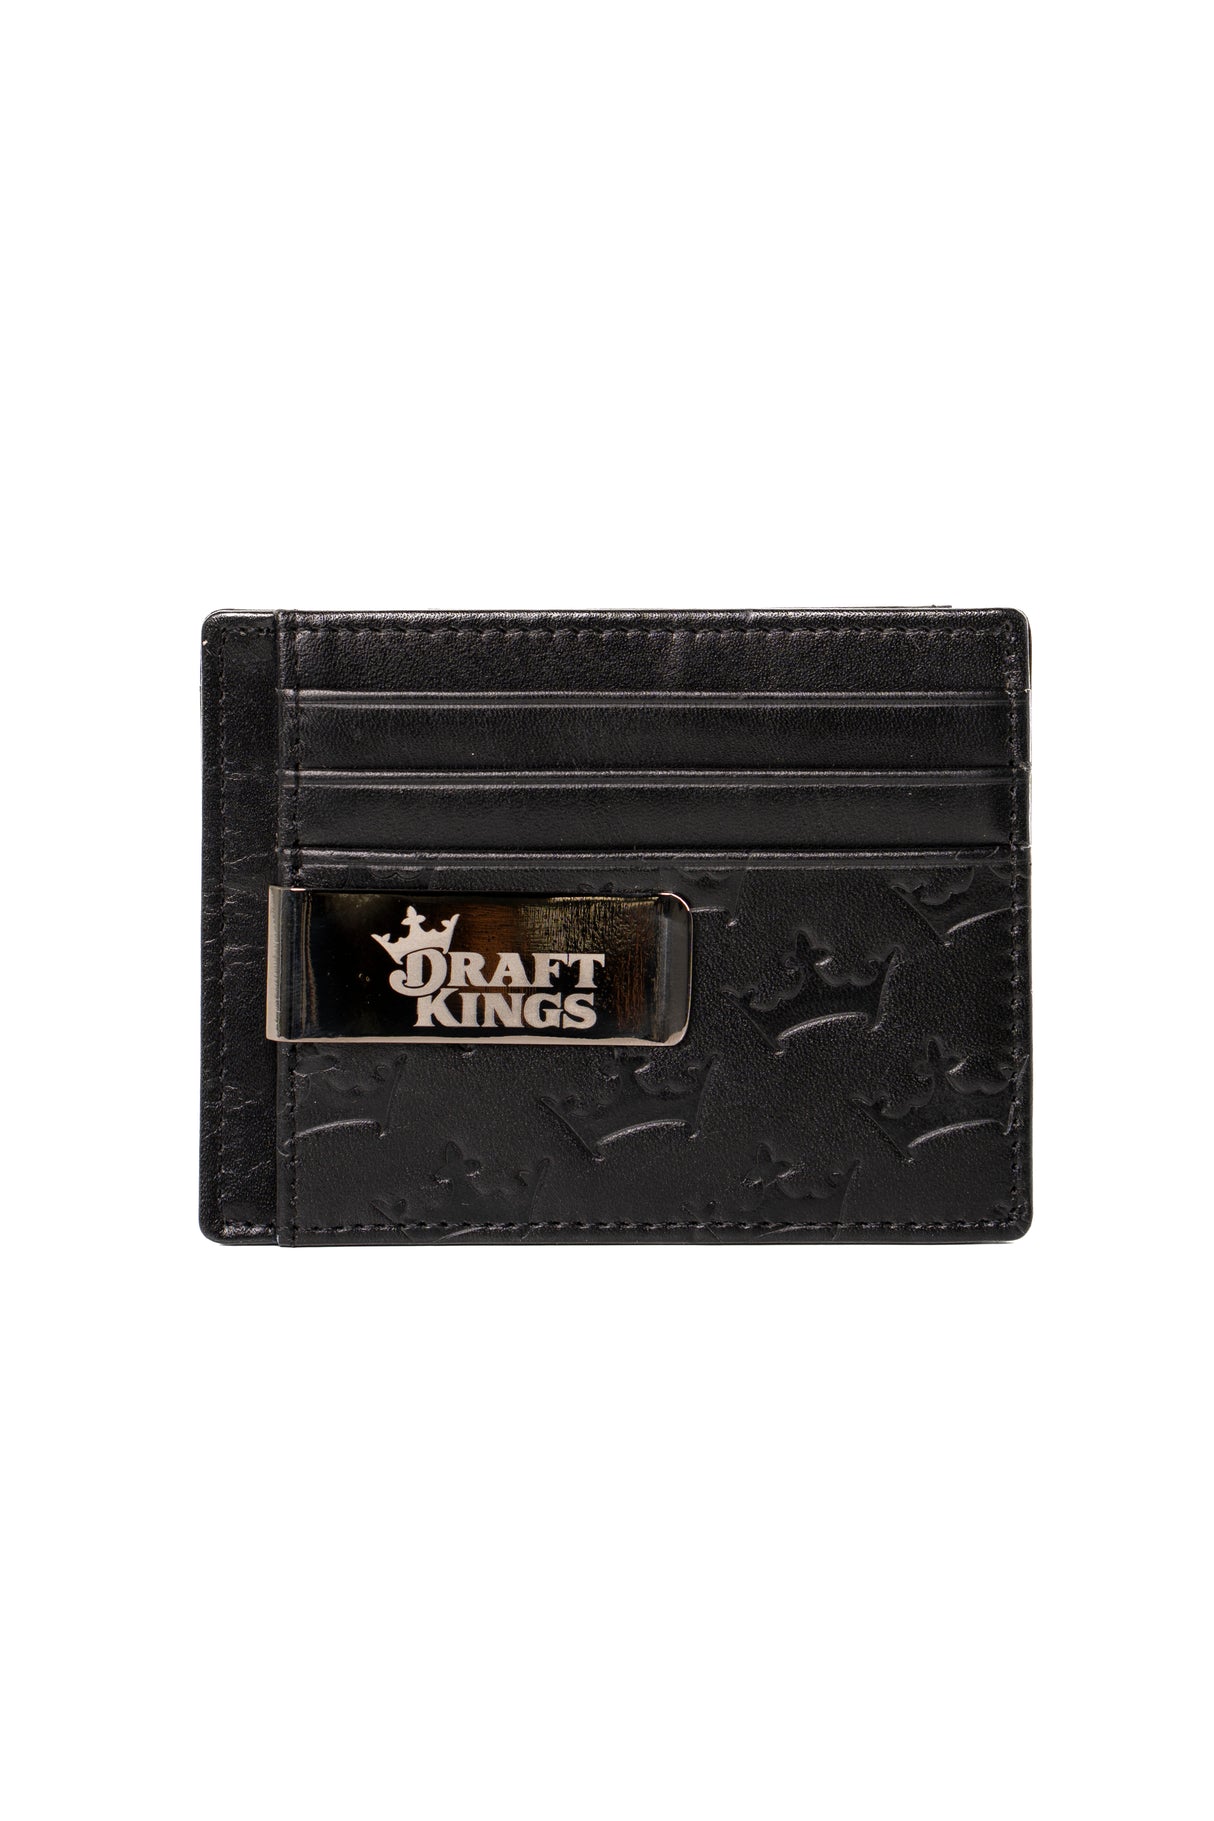 DraftKings Leather Money Clip Wallet